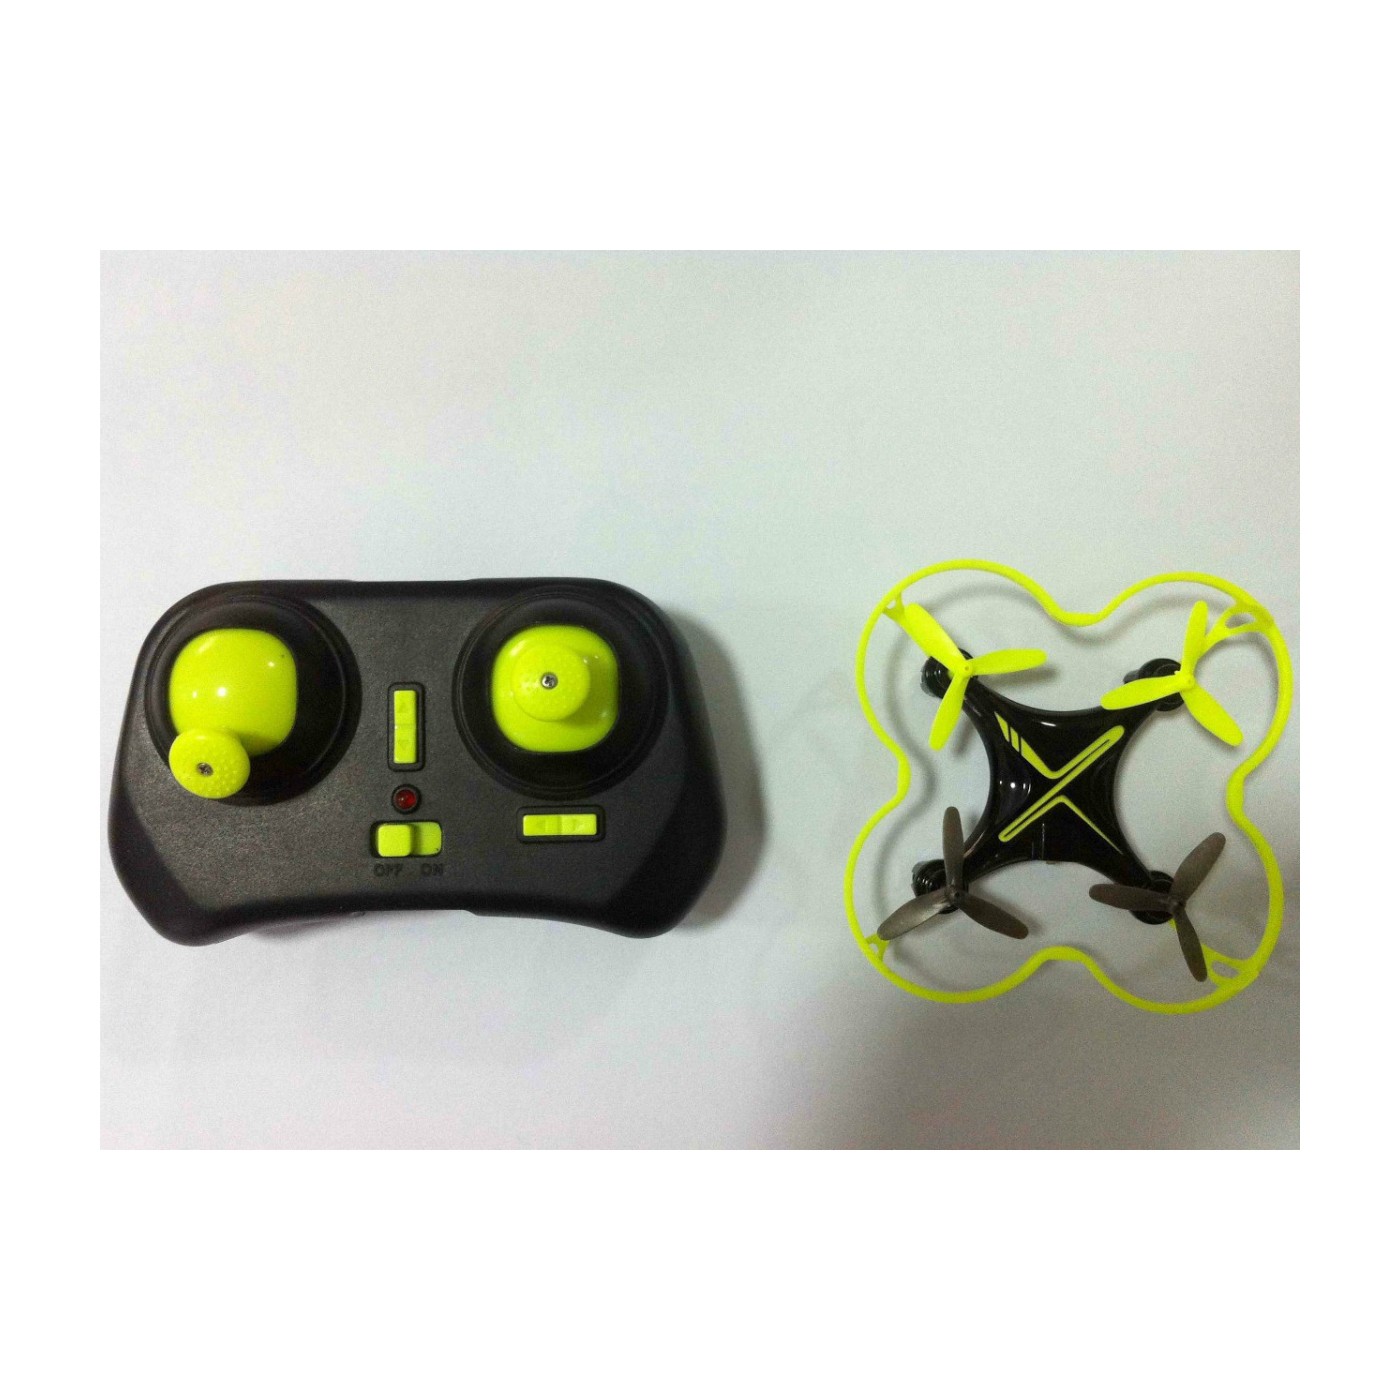 Drone W66183RG Black and Green